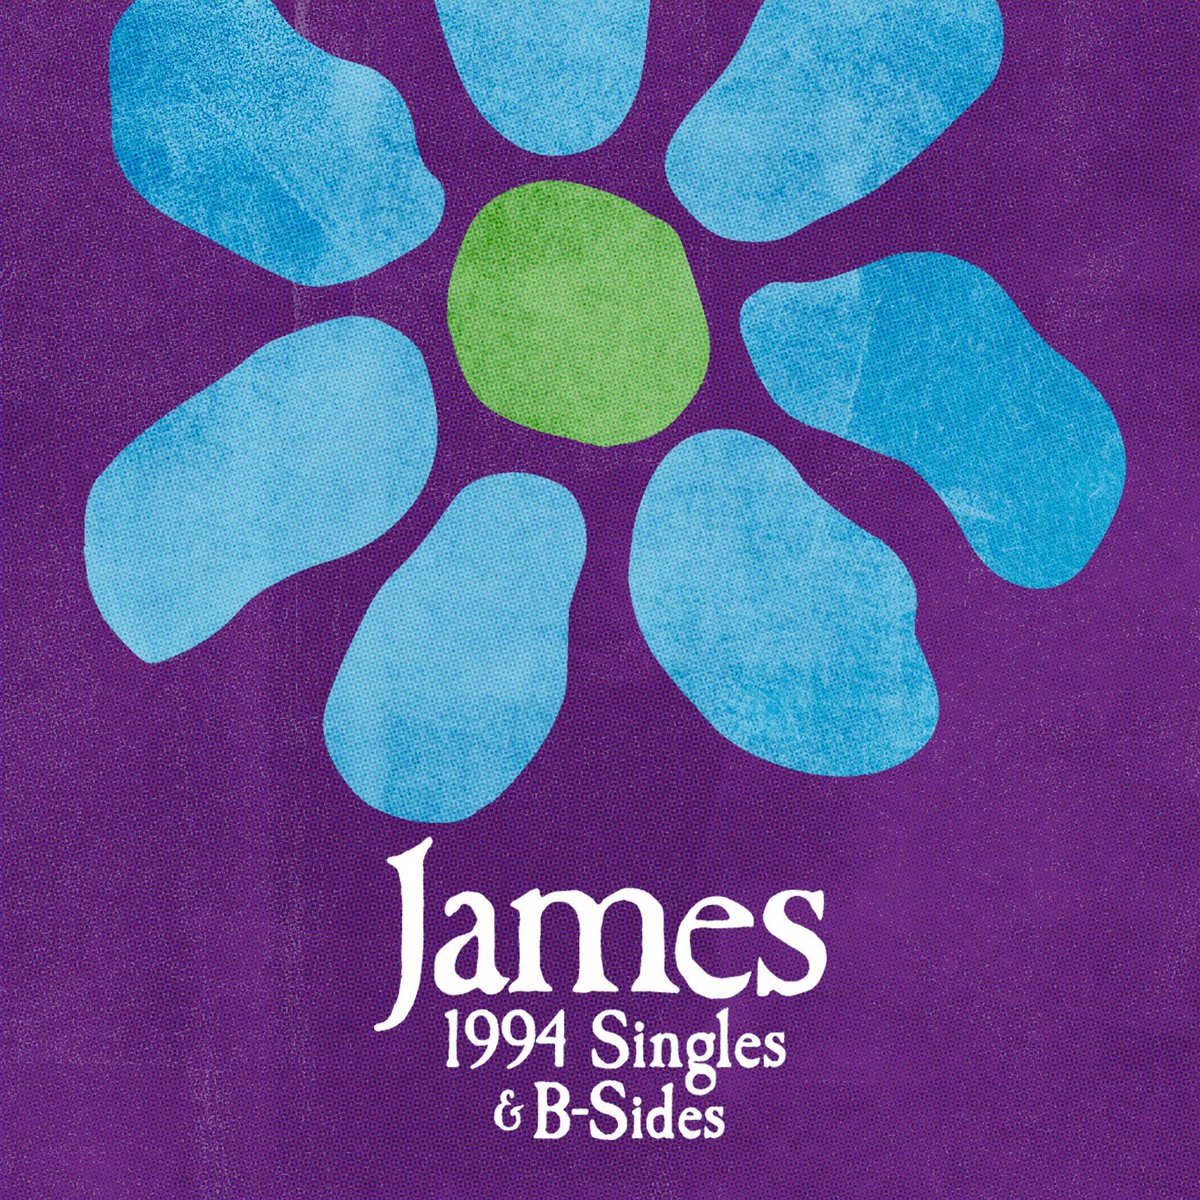 Happy Friday! The 1994 Singles and B-Sides bundle is now available on all DSPs james.lnk.to/1994 😎